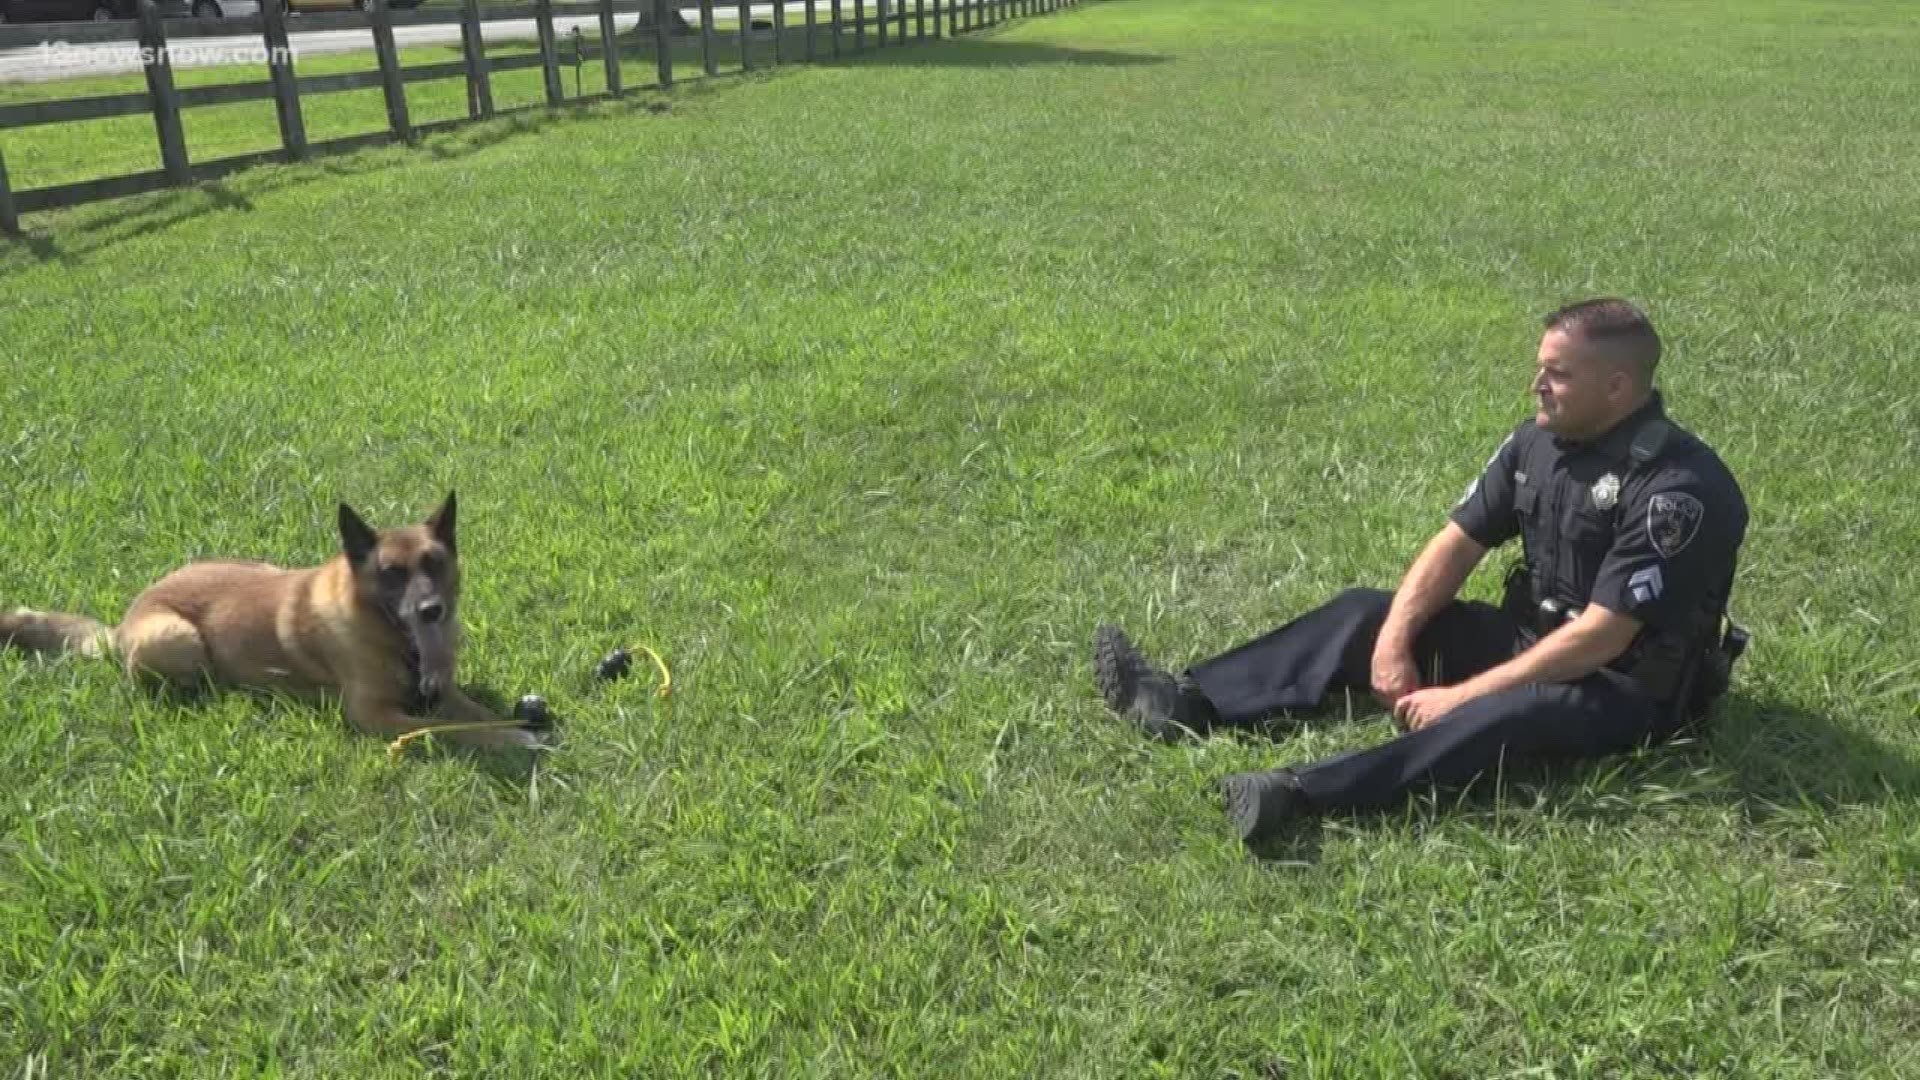 Newport News Police Department's retired K9 passed away. K9 Havoc was the oldest and longest-serving dog before he retired in July of 2018.